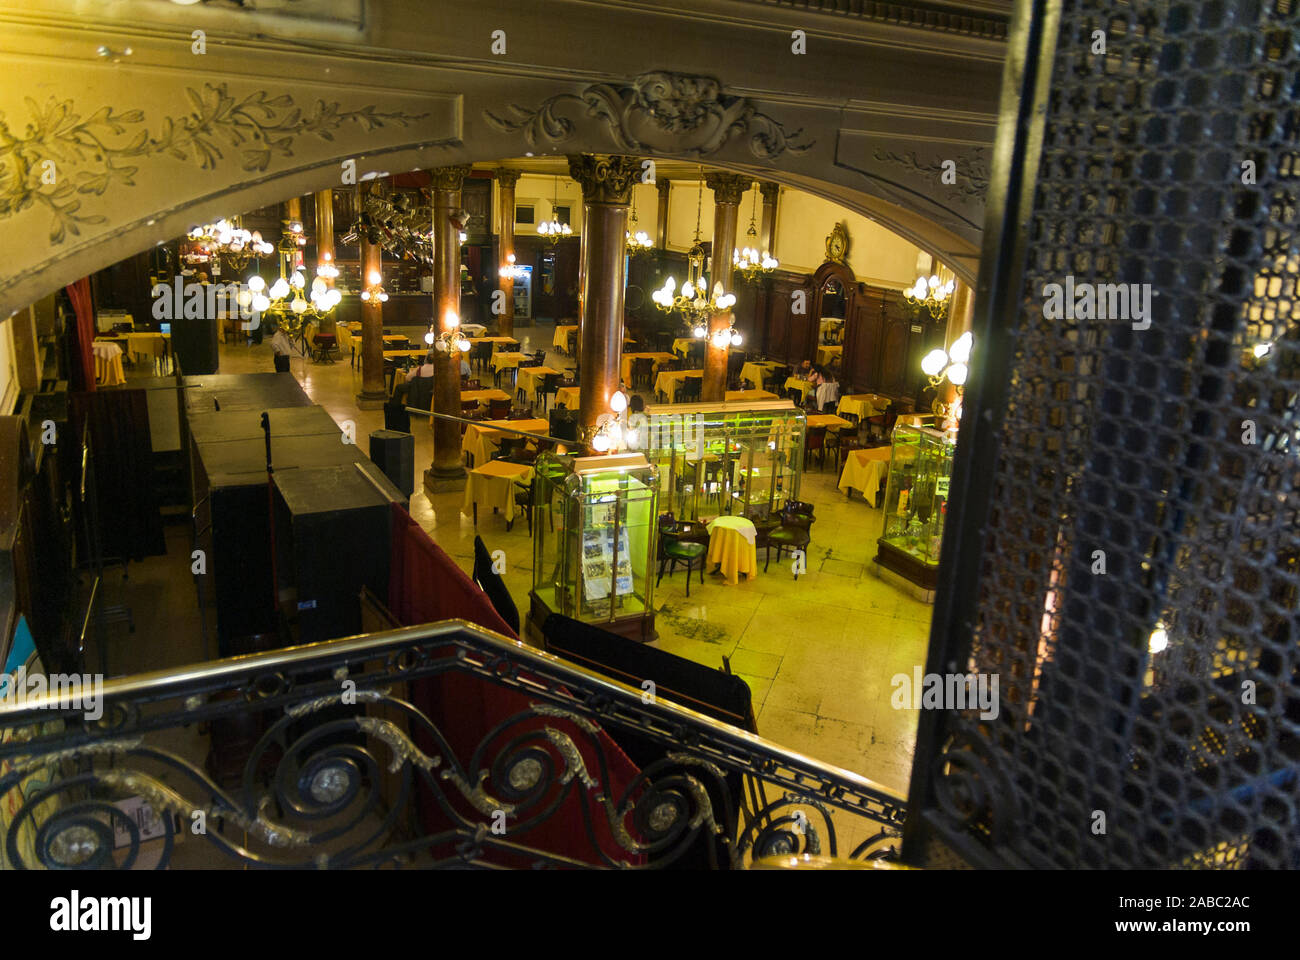 BUENOS AIRES, ARGENTINA-APRIL 8: confiteria ideal is a famous bar in the avenida de mayo opened in the 1894, the oldest in town,on the 8th april 2008 Stock Photo